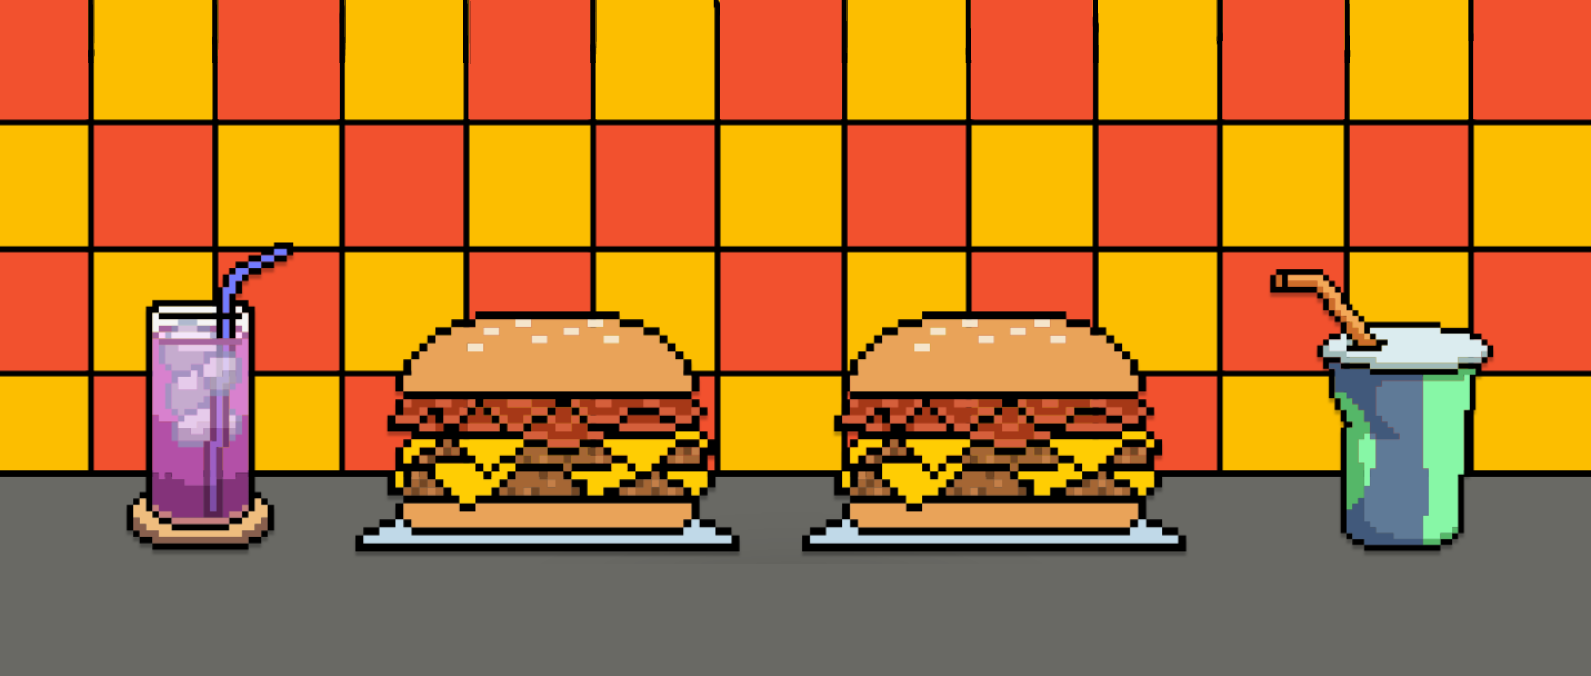 8bit deli counter with drinks and burger